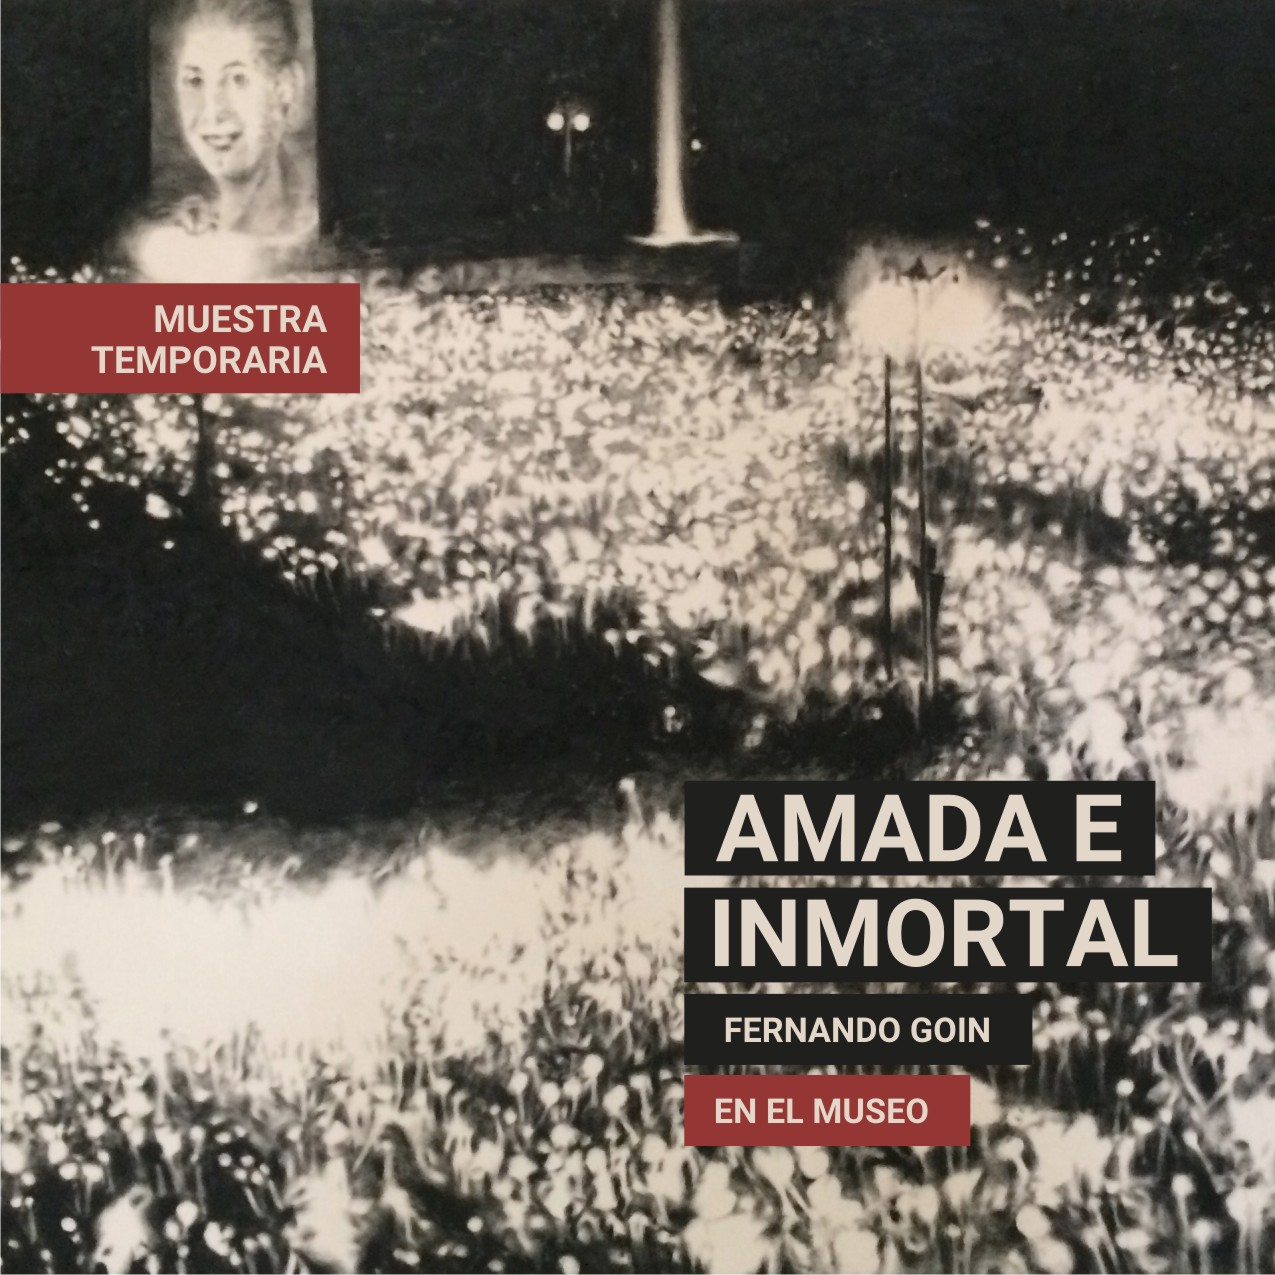 You are currently viewing AMADA E INMORTAL